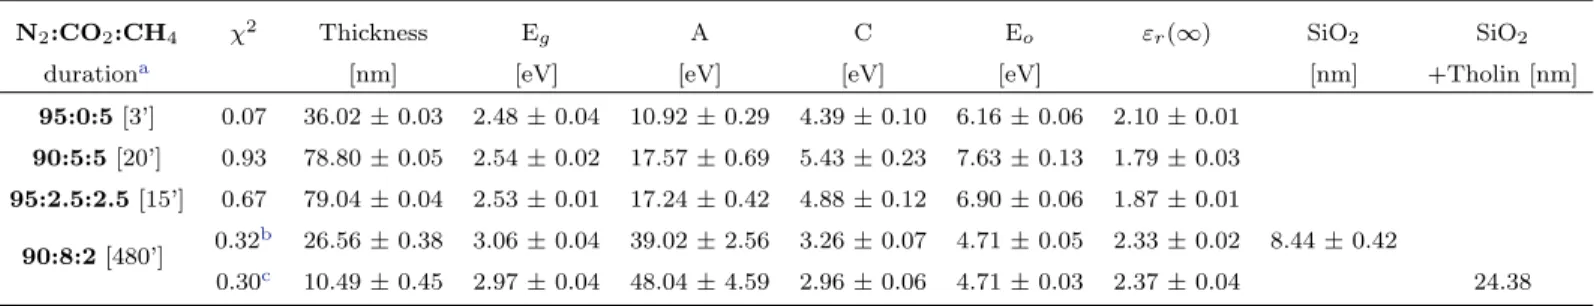 Table 1. Fitted parameters for a Tauc-Lorentz oscillator describing tholins thin films.